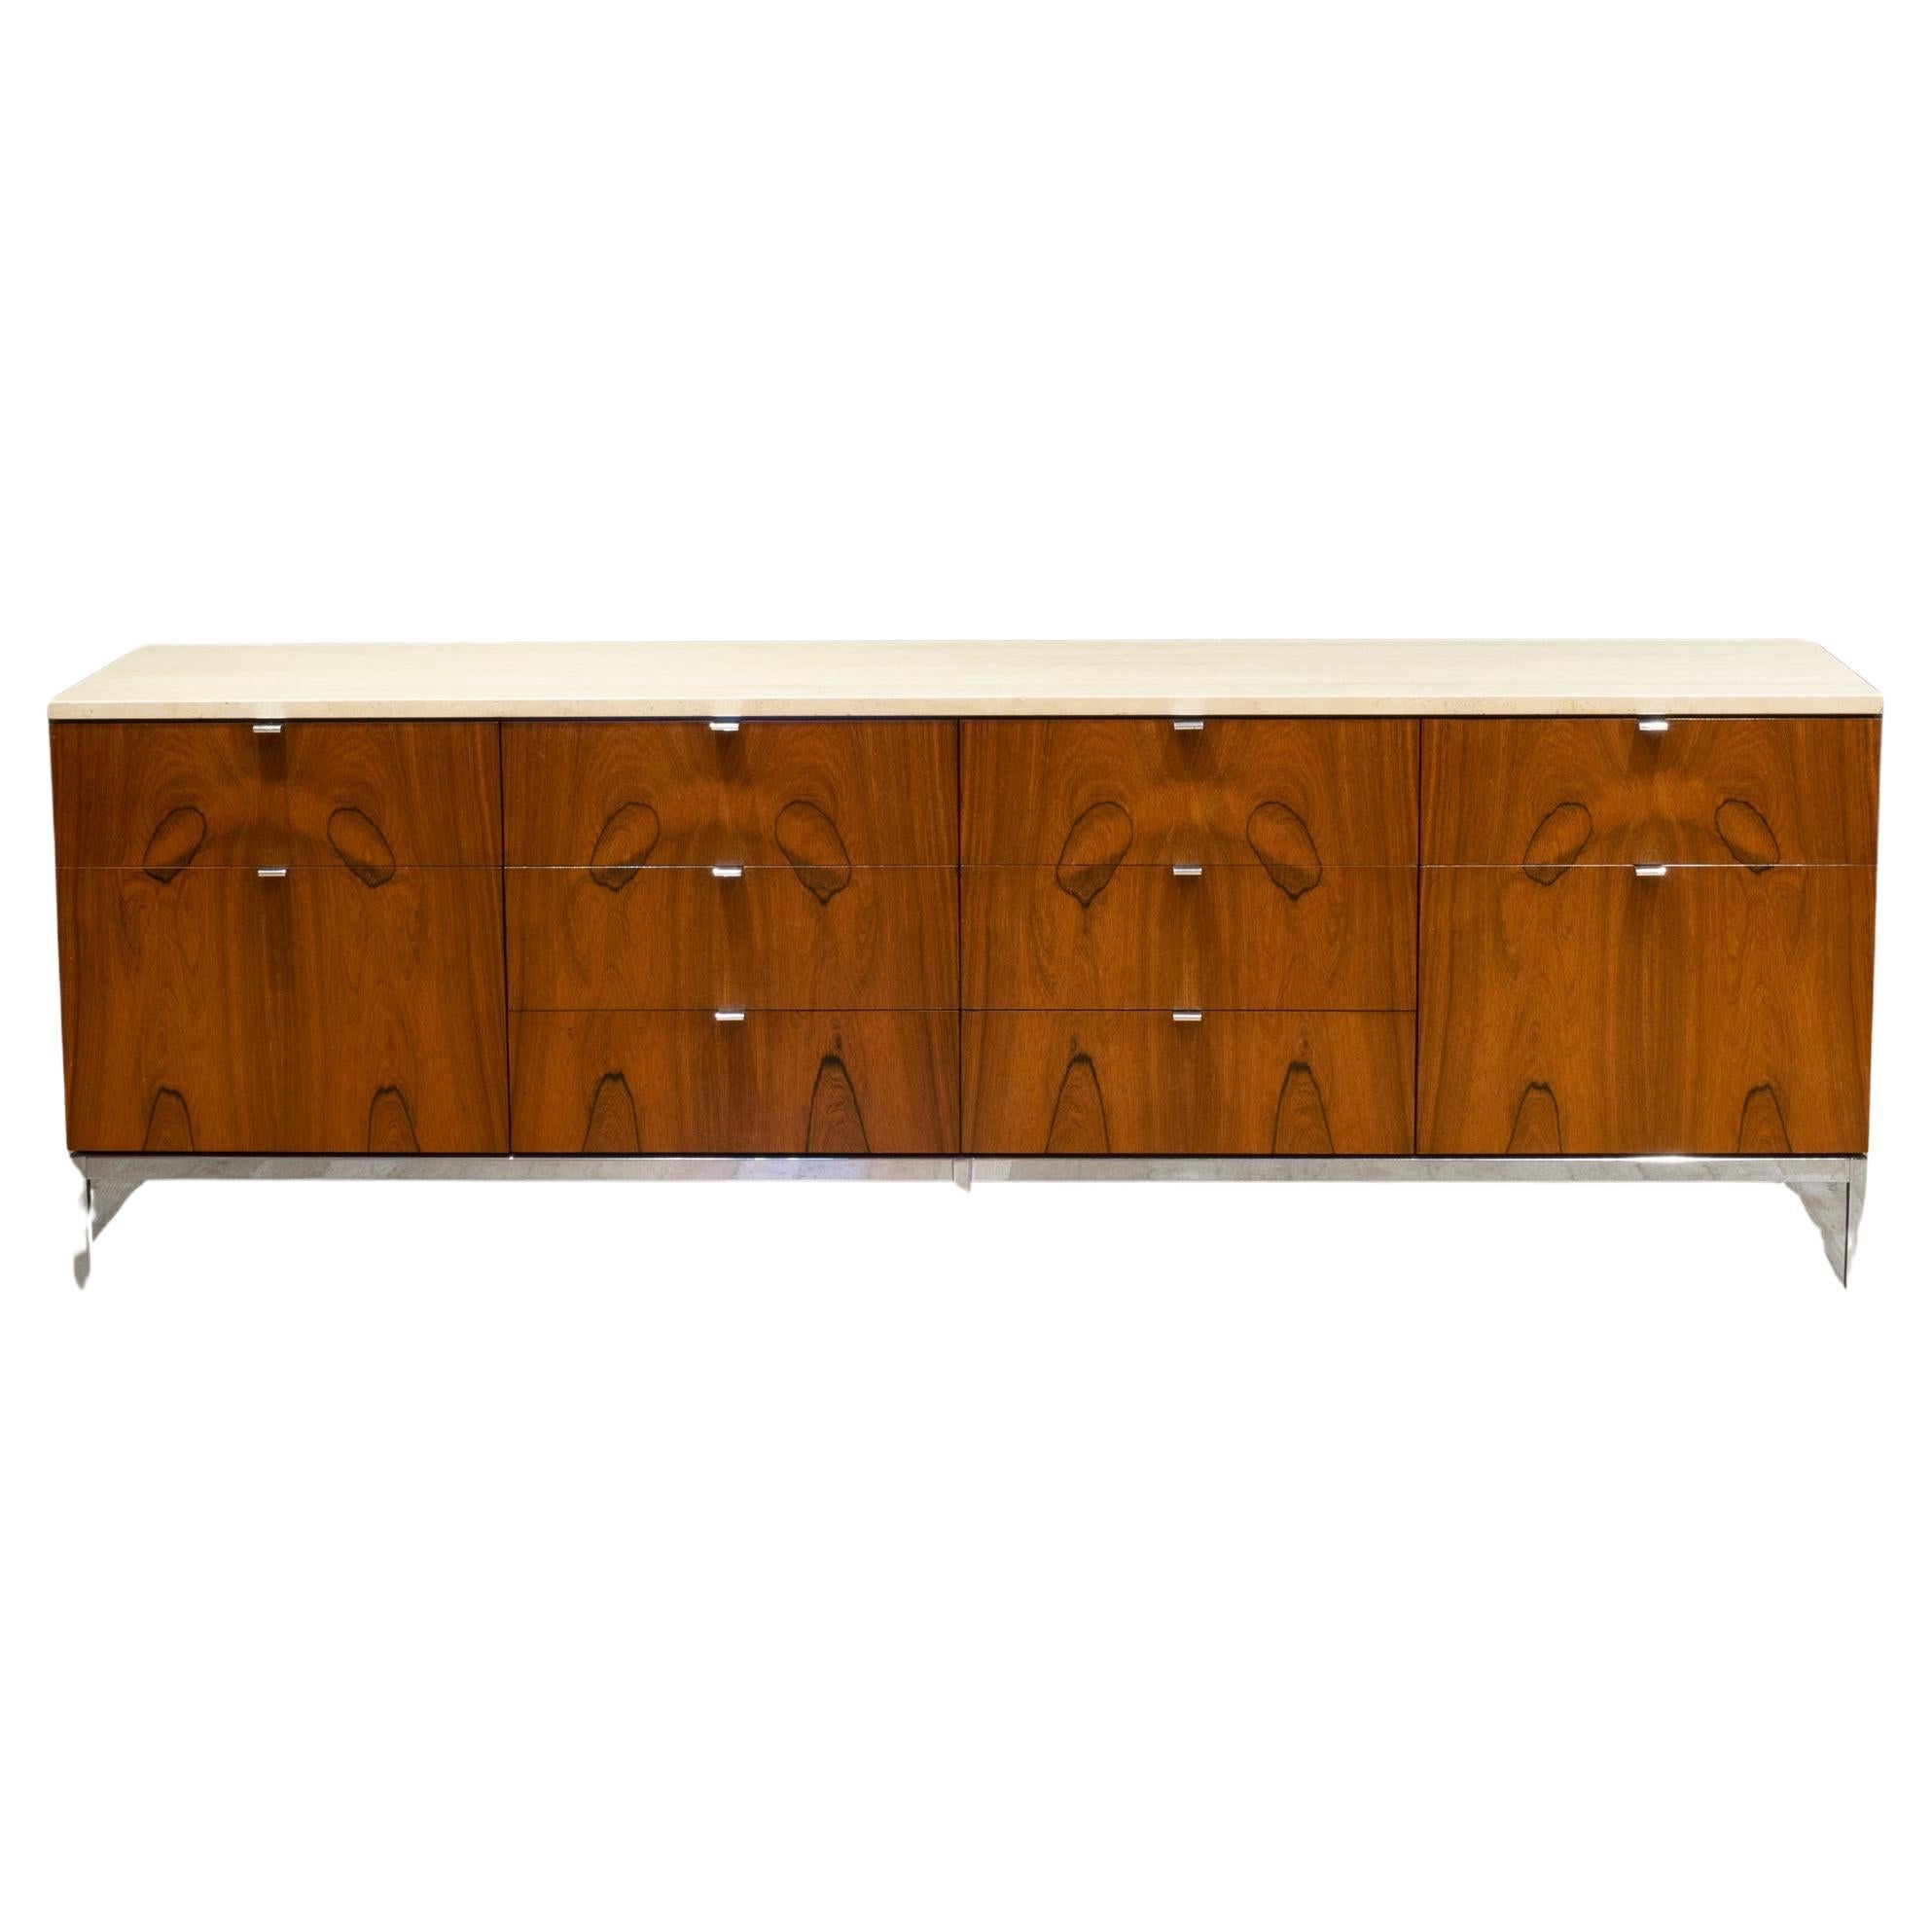 Mid-century Florence Knoll Rosewood Credenza with Travertine Top c.1950-1970